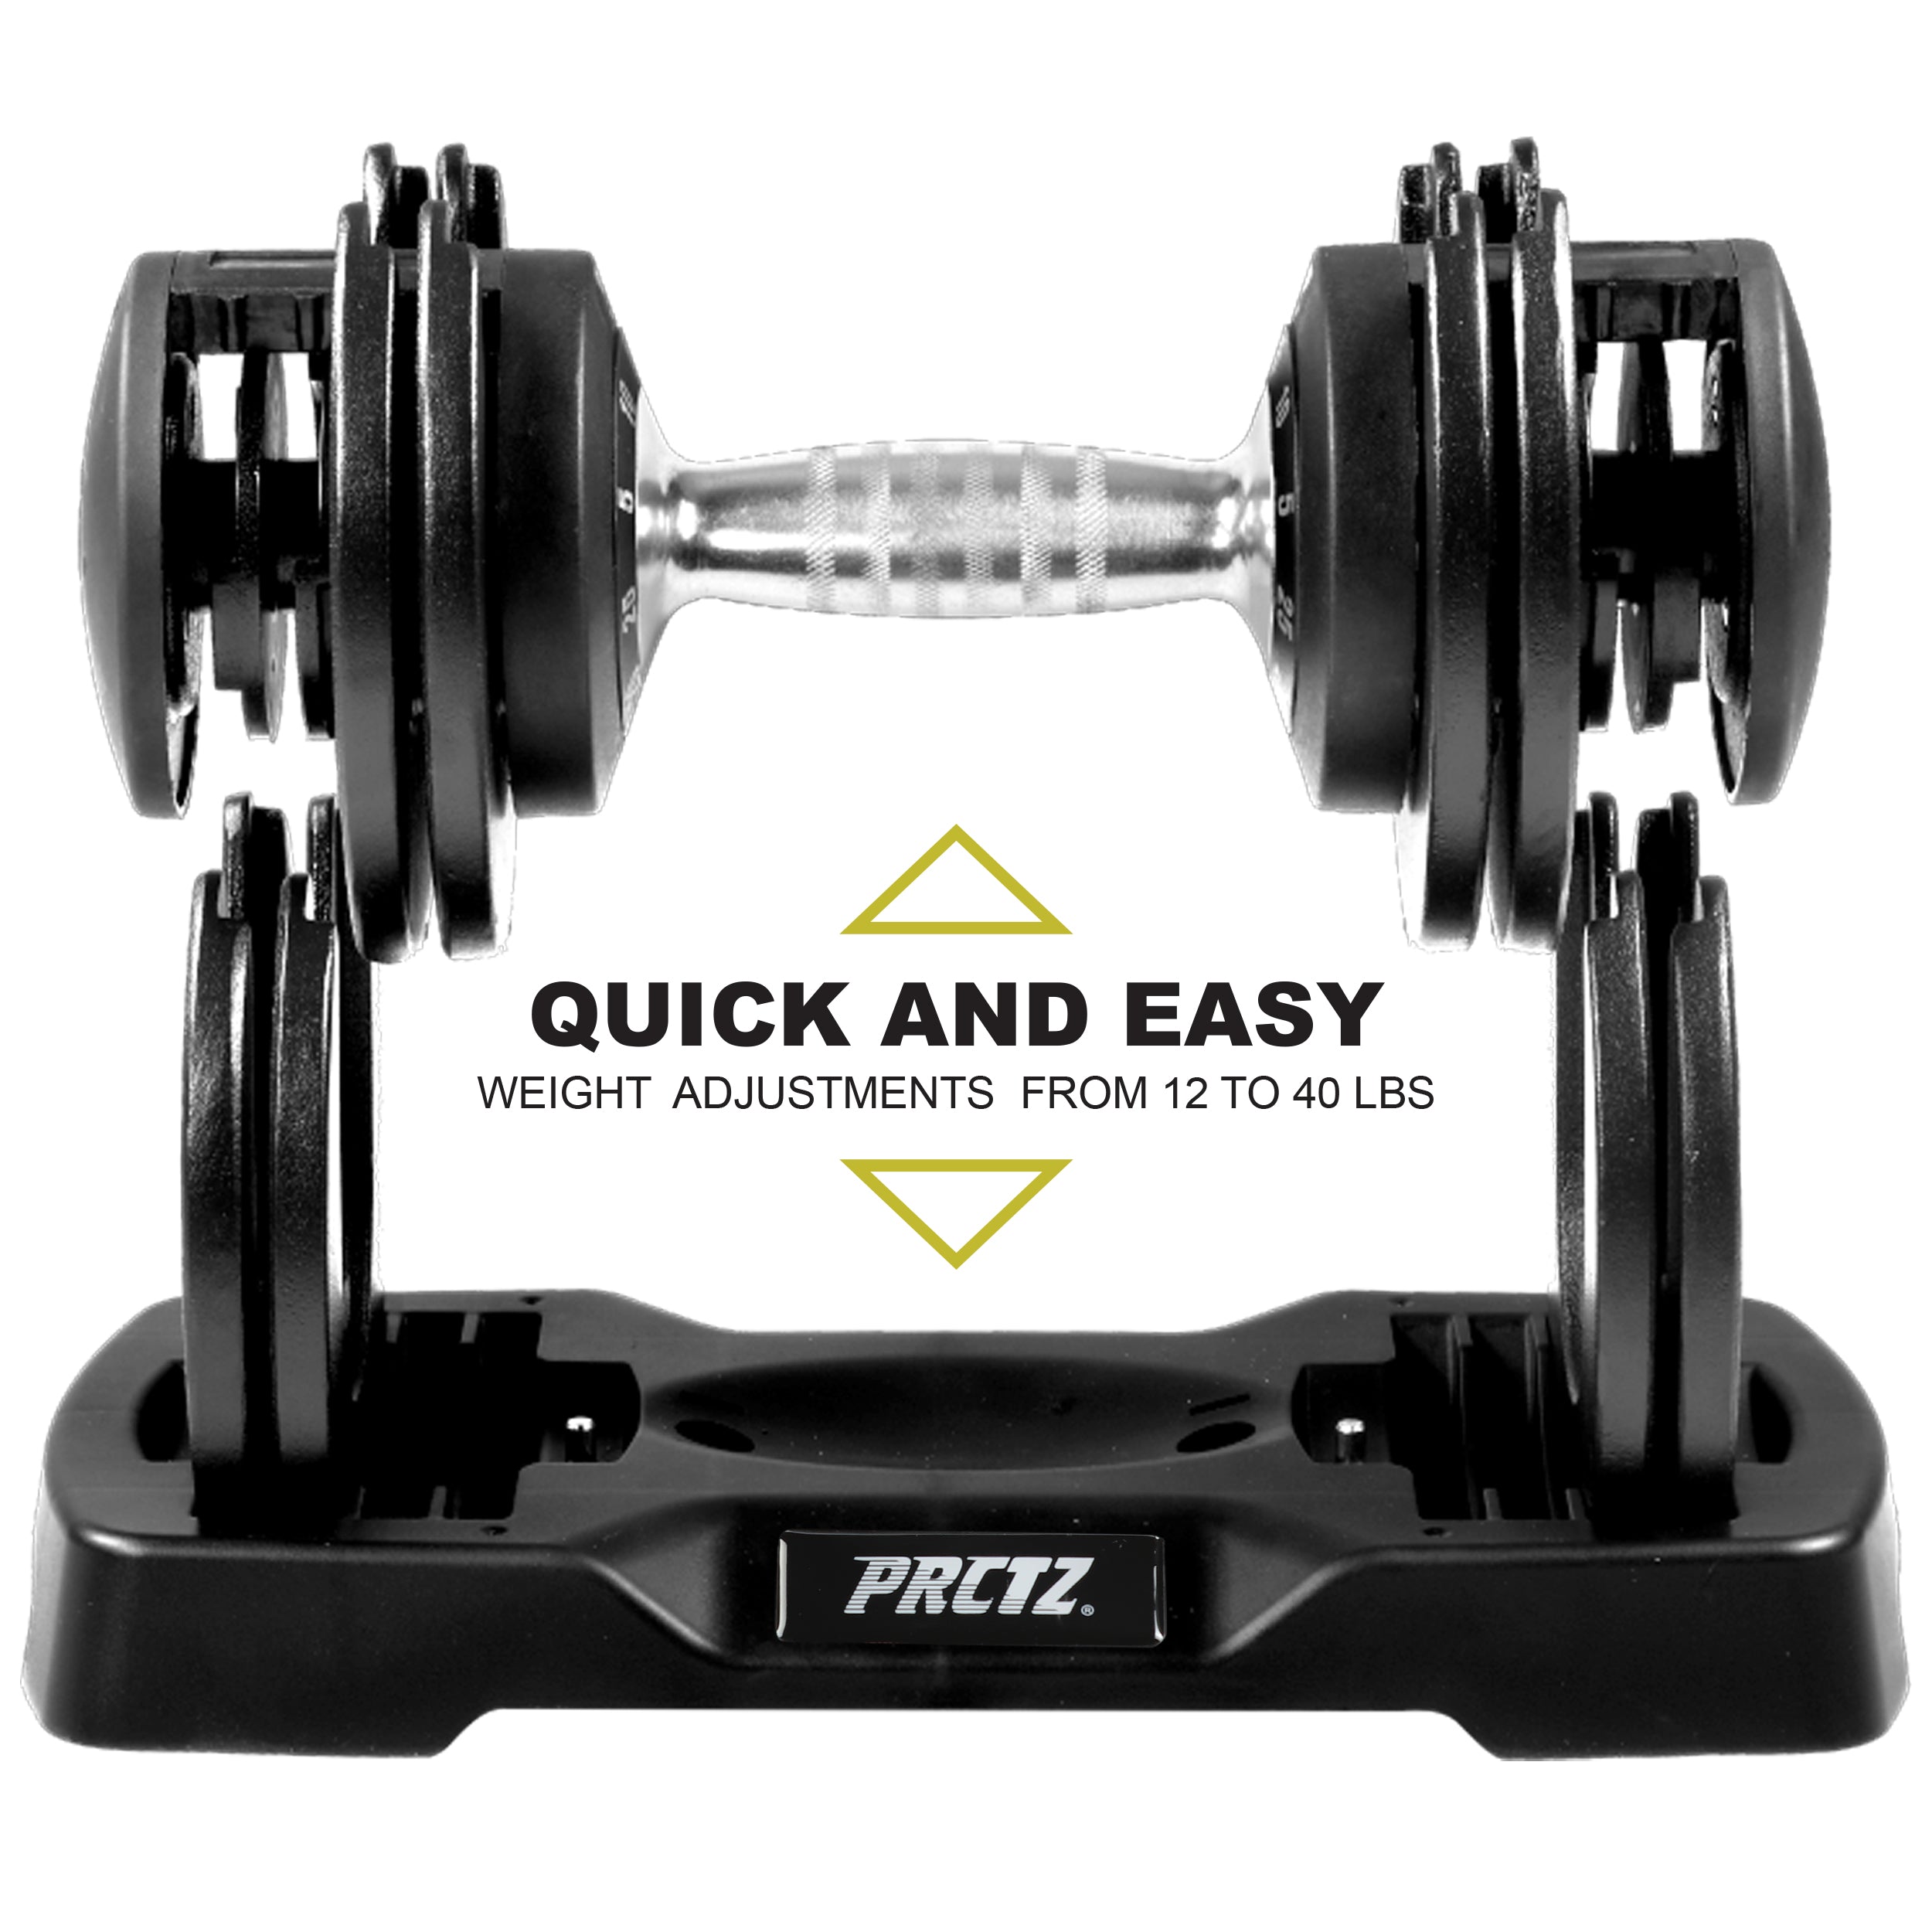 PRCTZ products » Compare prices and see offers now